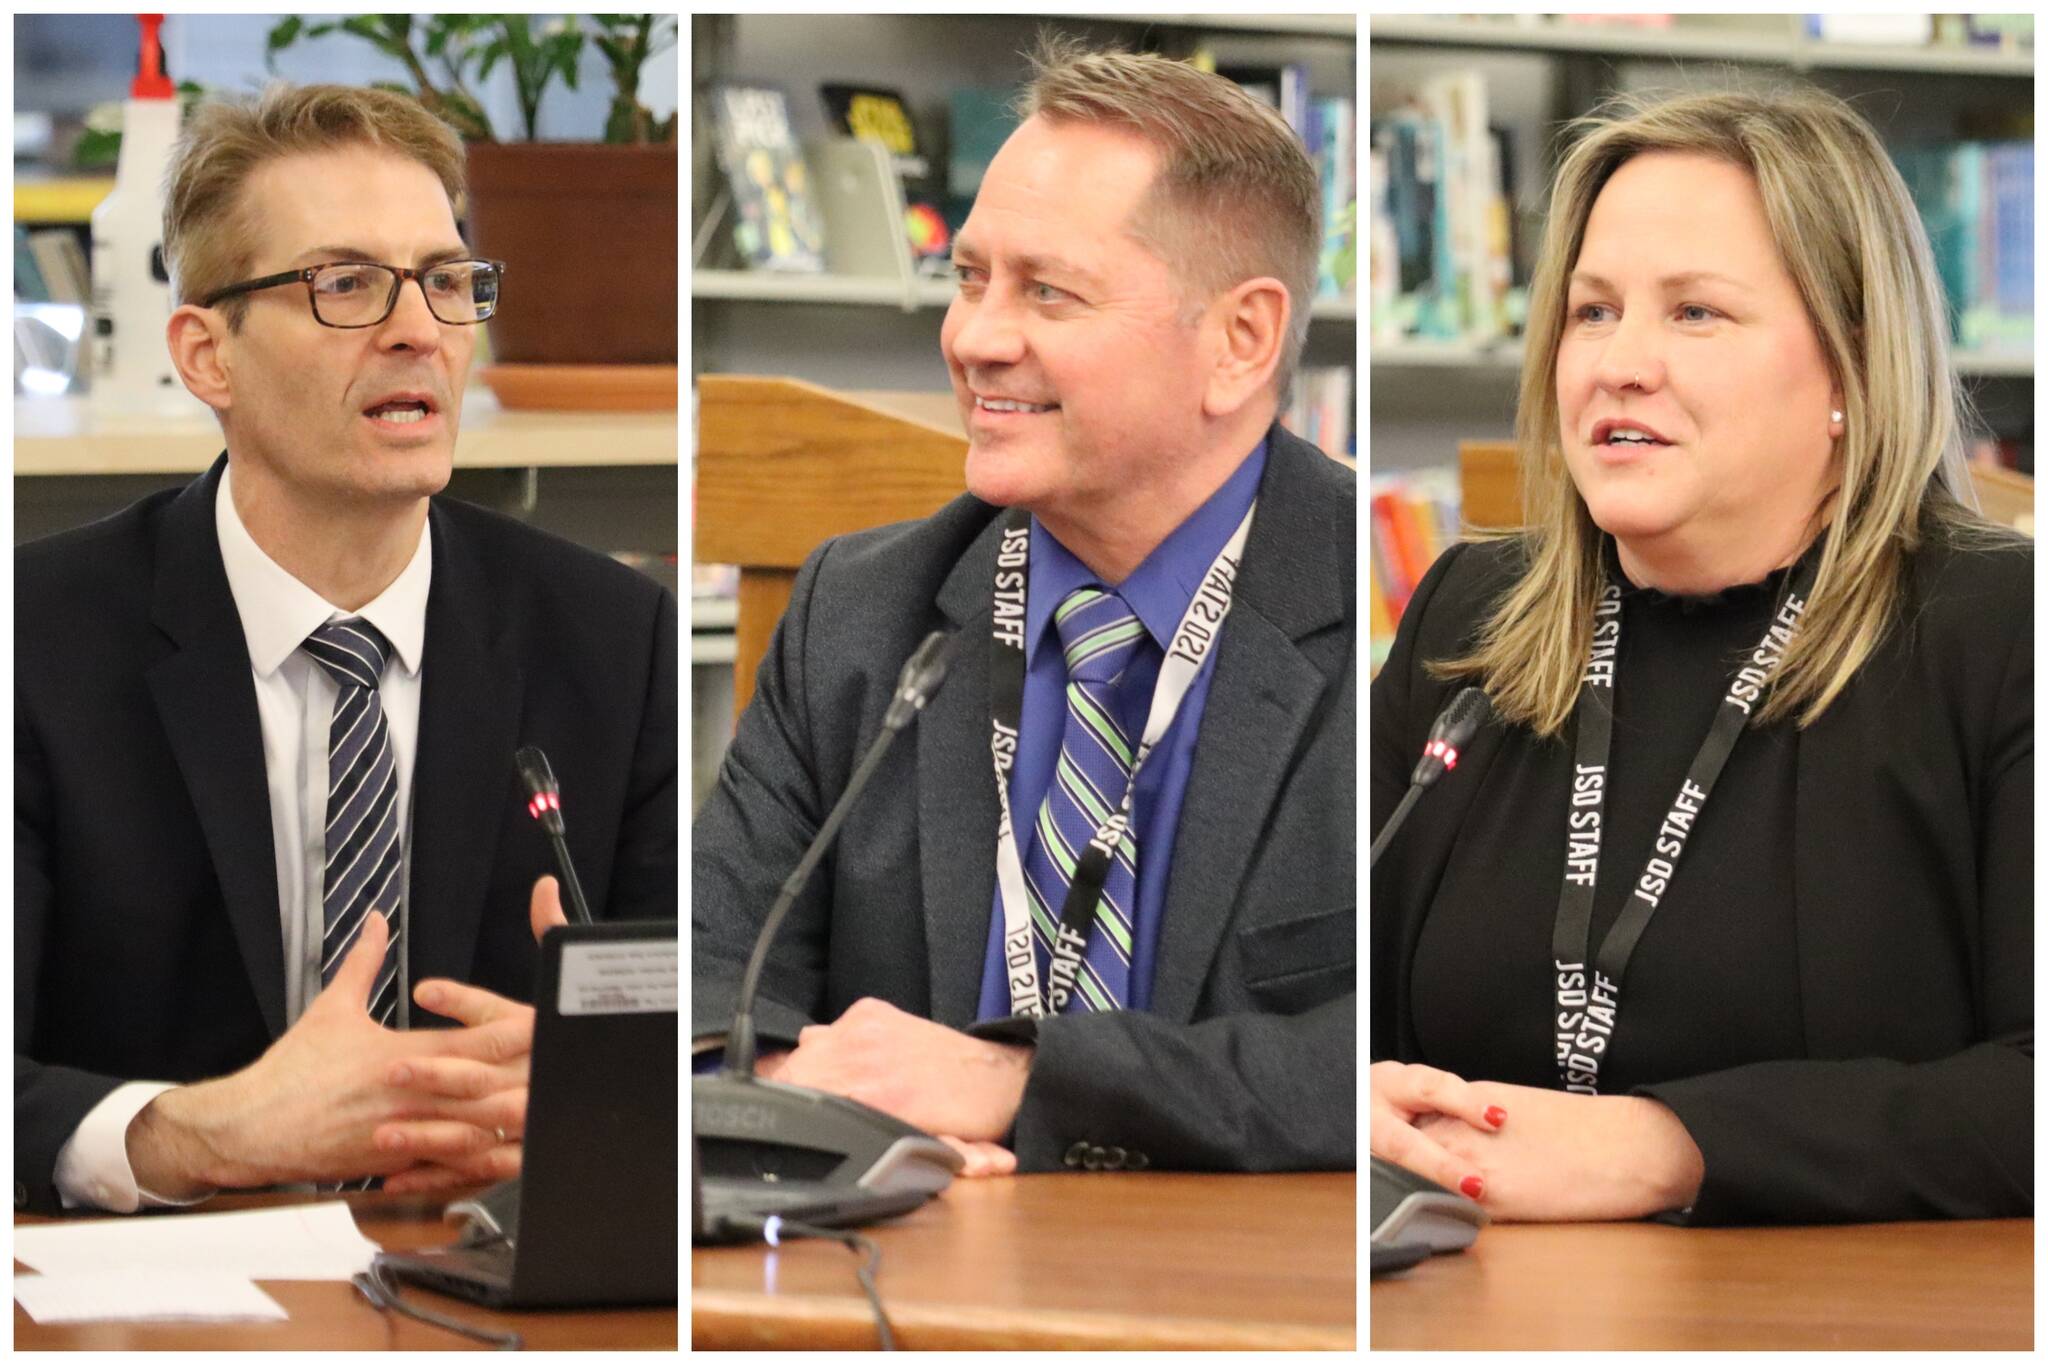 This combination image shows Frank Hauser, Thom Peck and Carlee Simon, the three candidates who are currently being considered for the Juneau School District superintendent position. The district is expected to make a decision on Friday. (Jonson Kuhn / Juneau Empire)